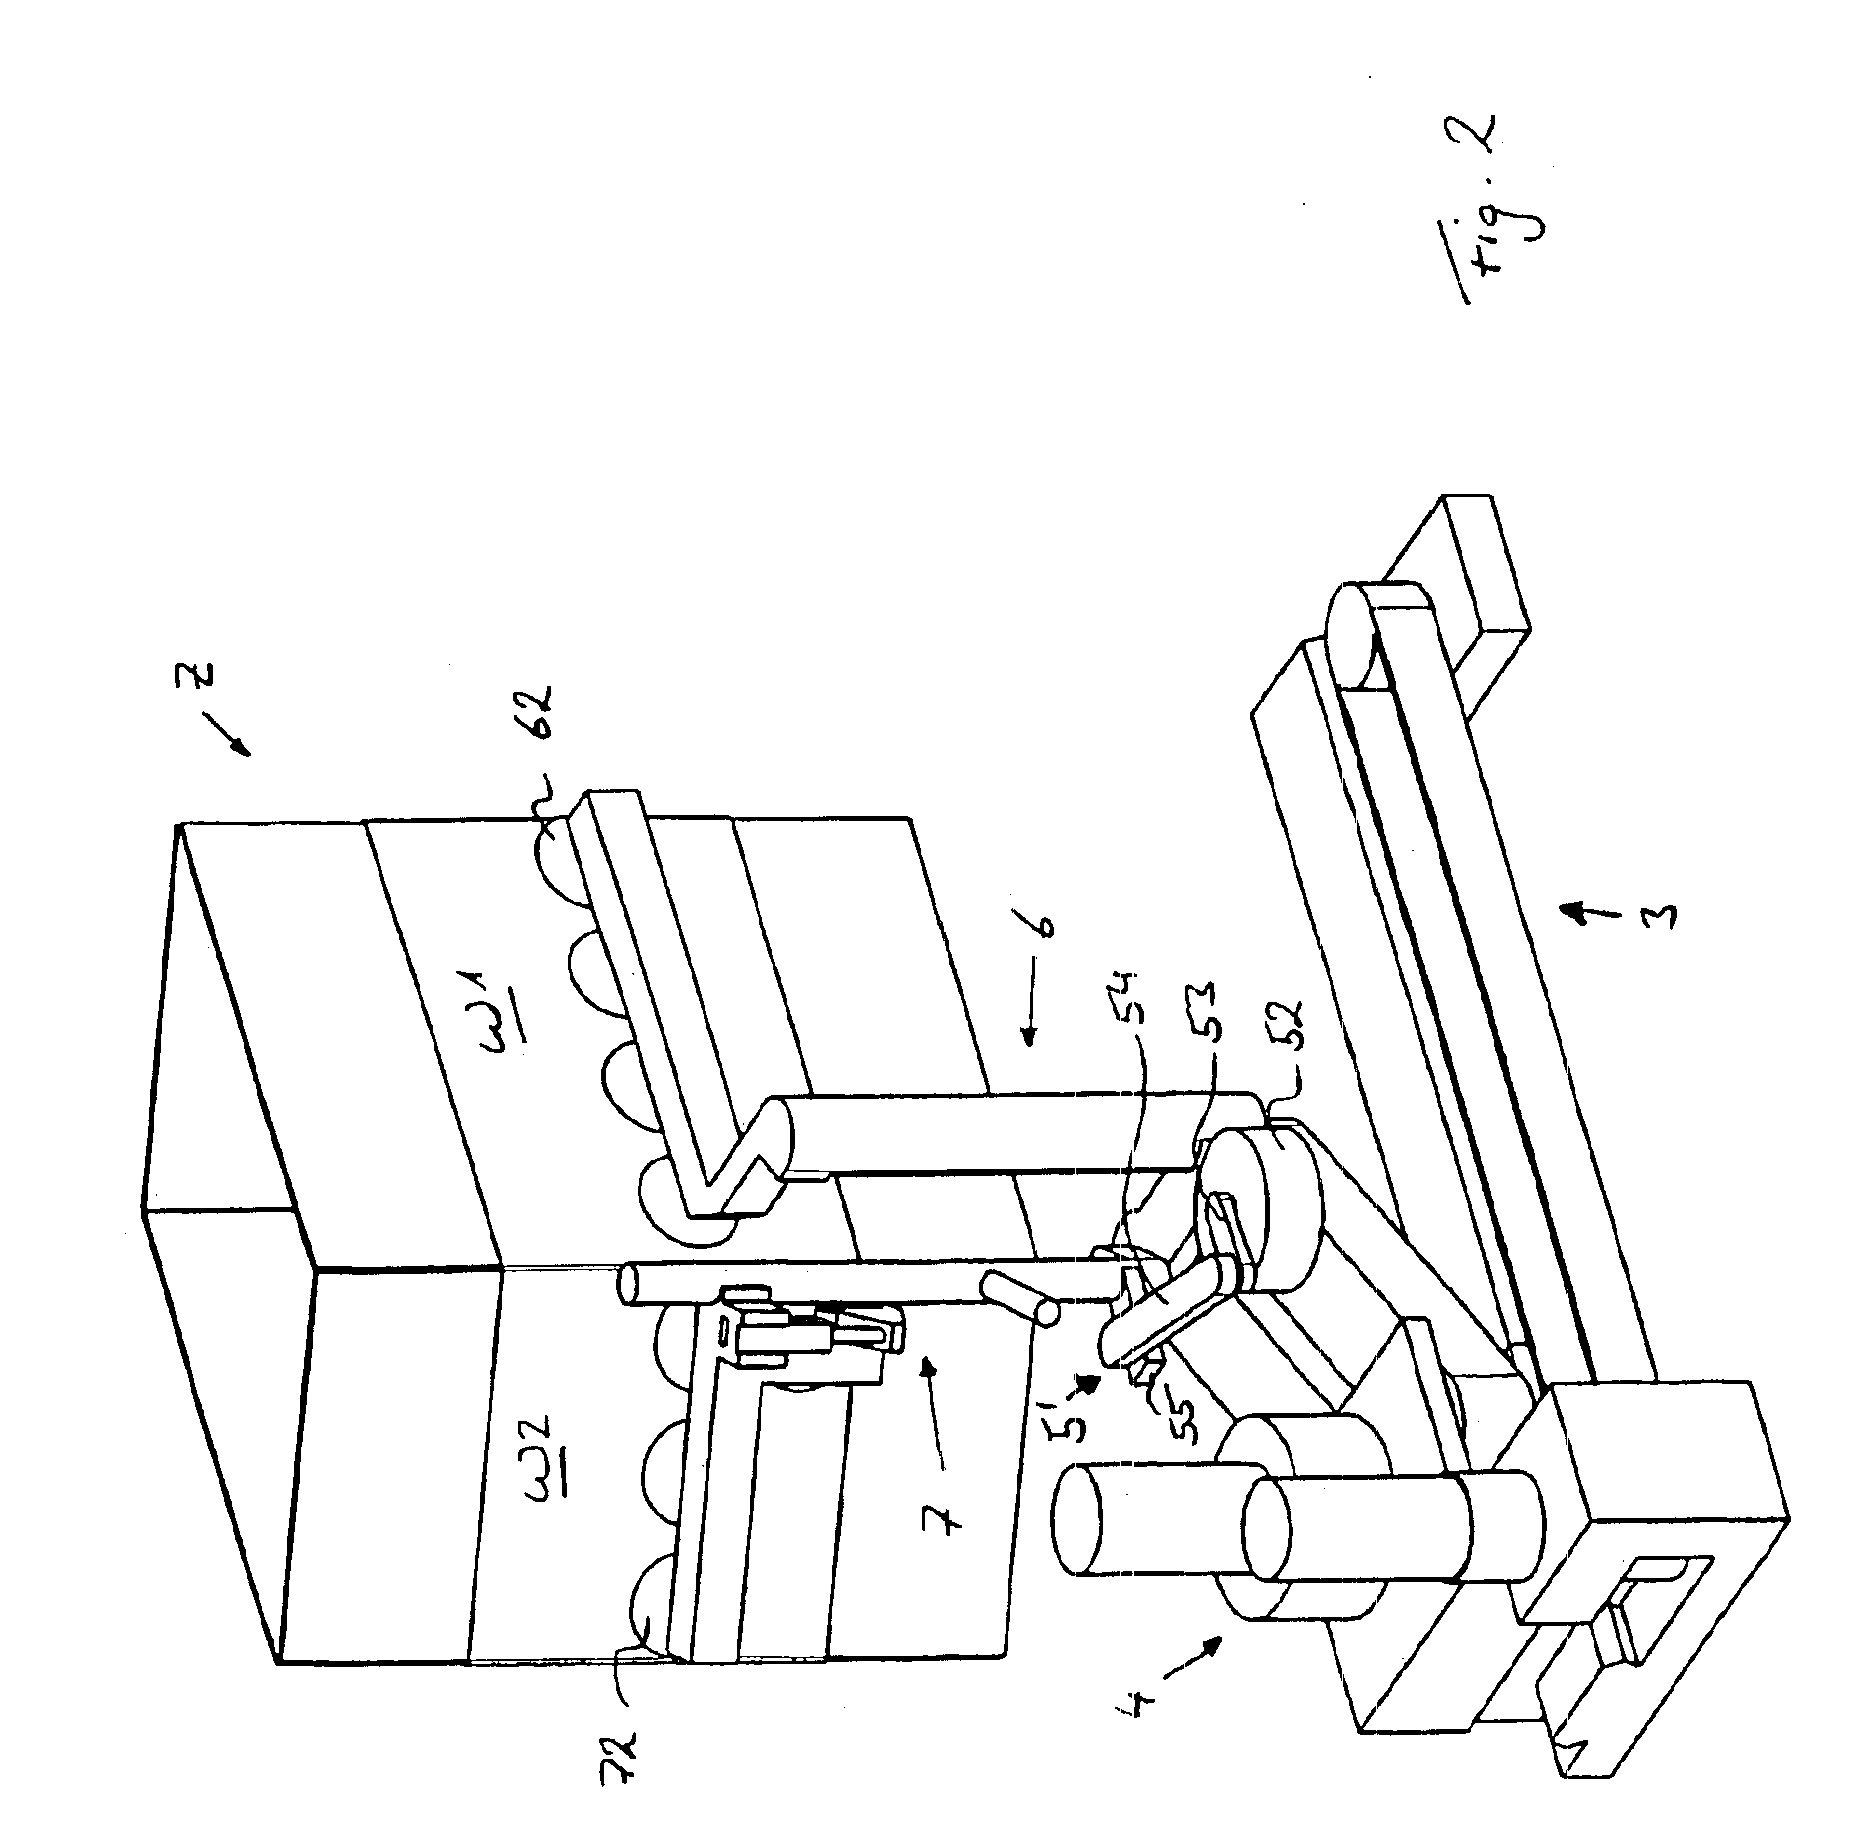 Apparatus for removing and erecting a folding-box blank